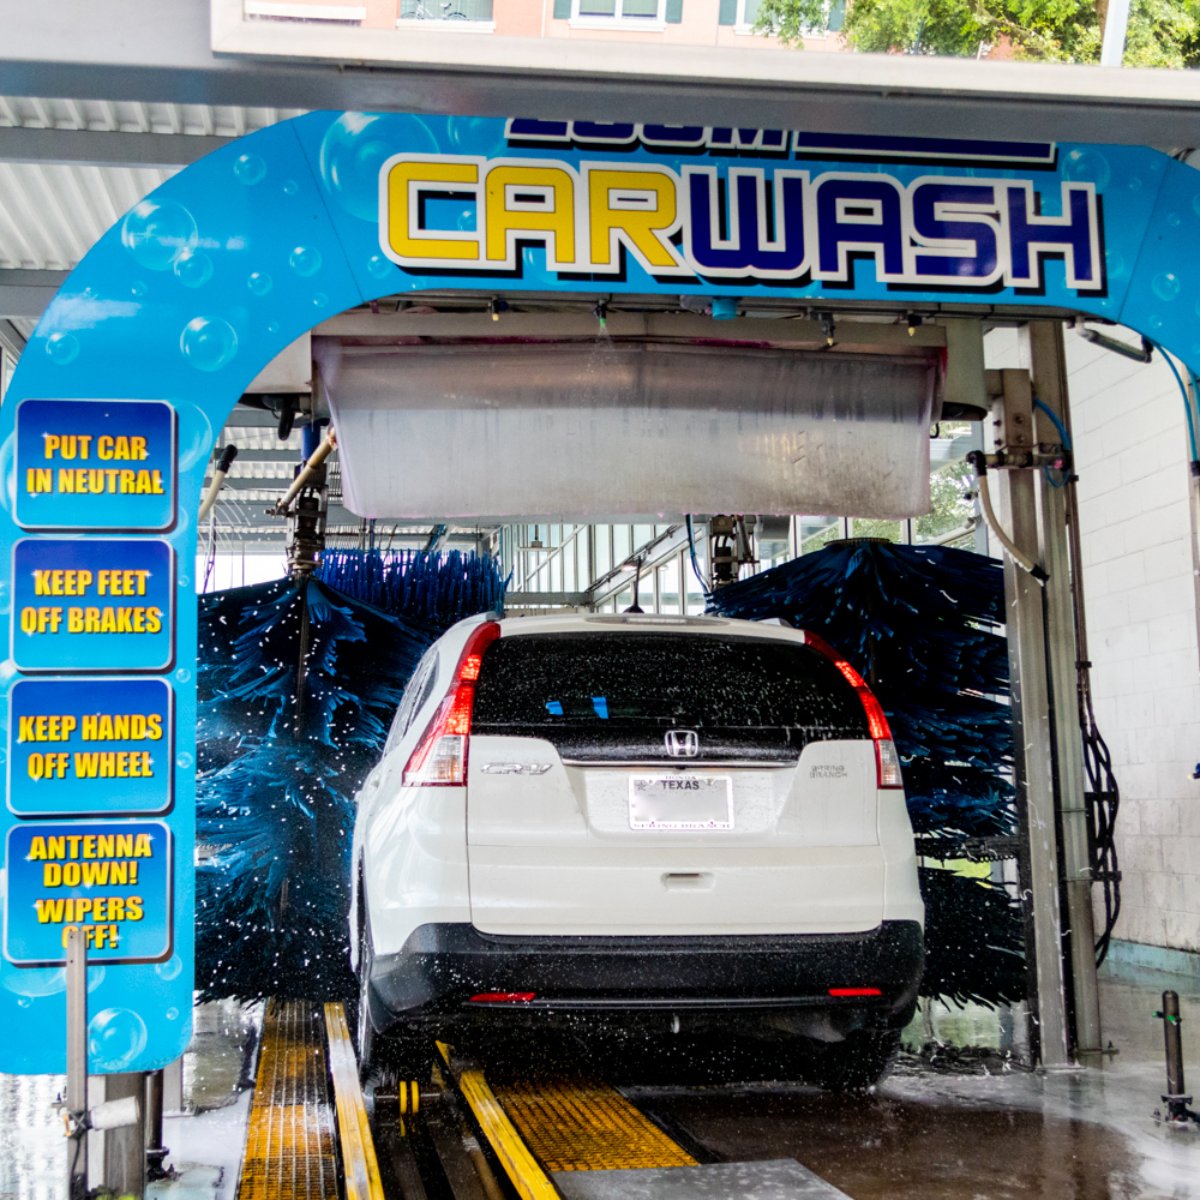 If you don't feel the same way about your car as the day you bought it, stop by: We'll help bring back that 'new car' feeling. #zoomcarwash #GoZoom #carwash #sofreshandsoclean #carwashday #lovemycar #carlove